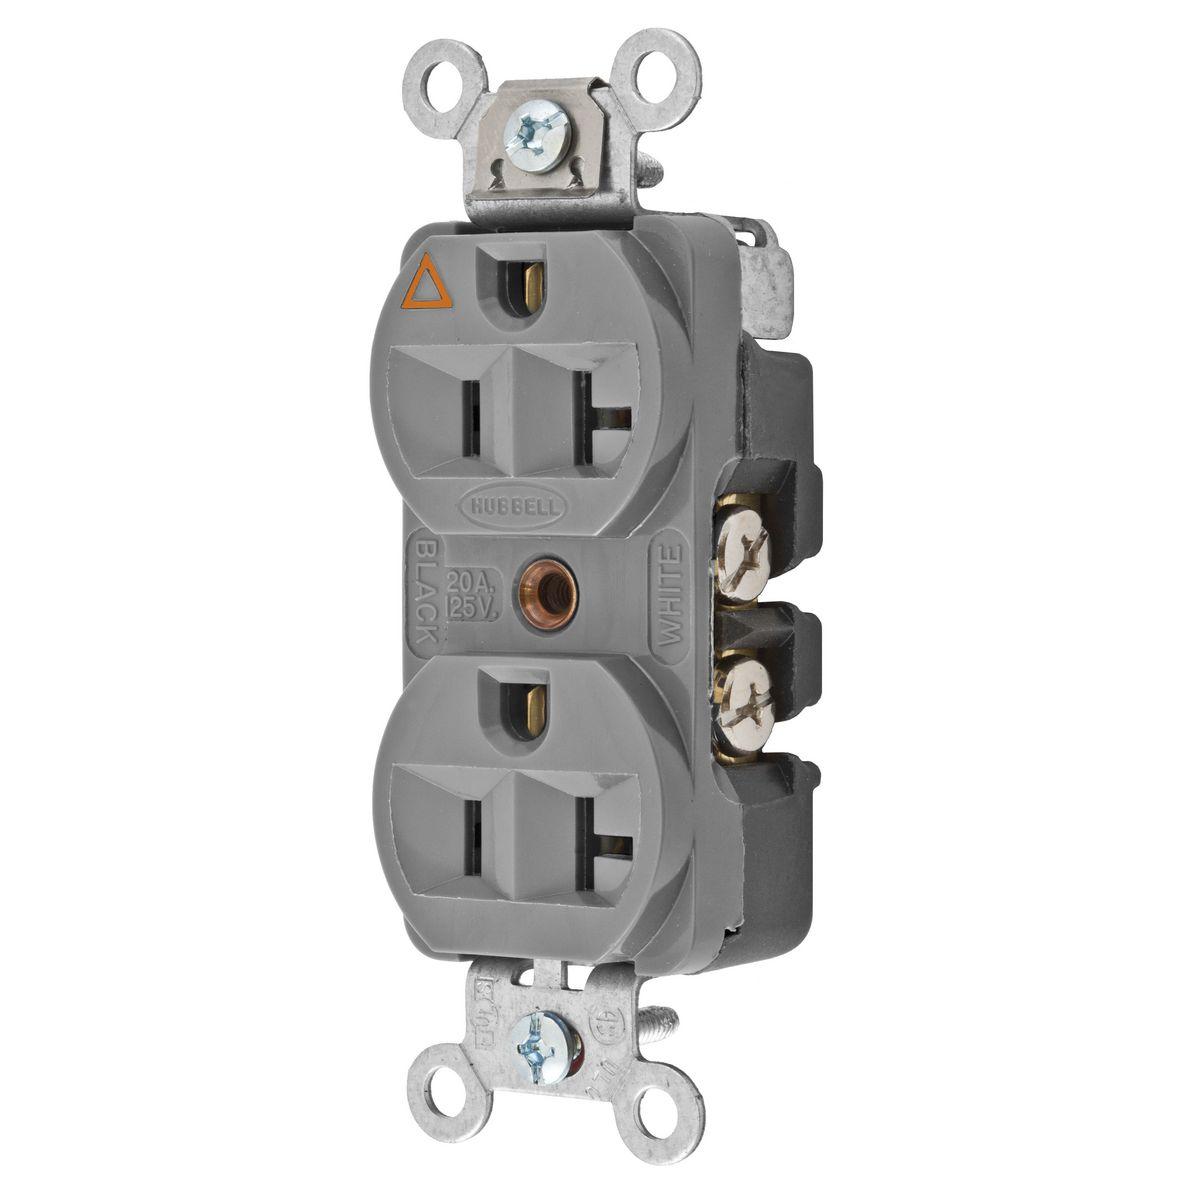 Hubbell CR5352IGGY Straight Blade Devices, Receptacles, Duplex,  Hubbell-Pro Heavy Duty, 2-Pole 3-Wire Grounding, 20A 125V, 5-20R, Gray, Single Pack, Isolated Ground.  ; Triangle marking on face indicates isolated ground ; Slender/compact design ; Finder Groove Face ; Isola